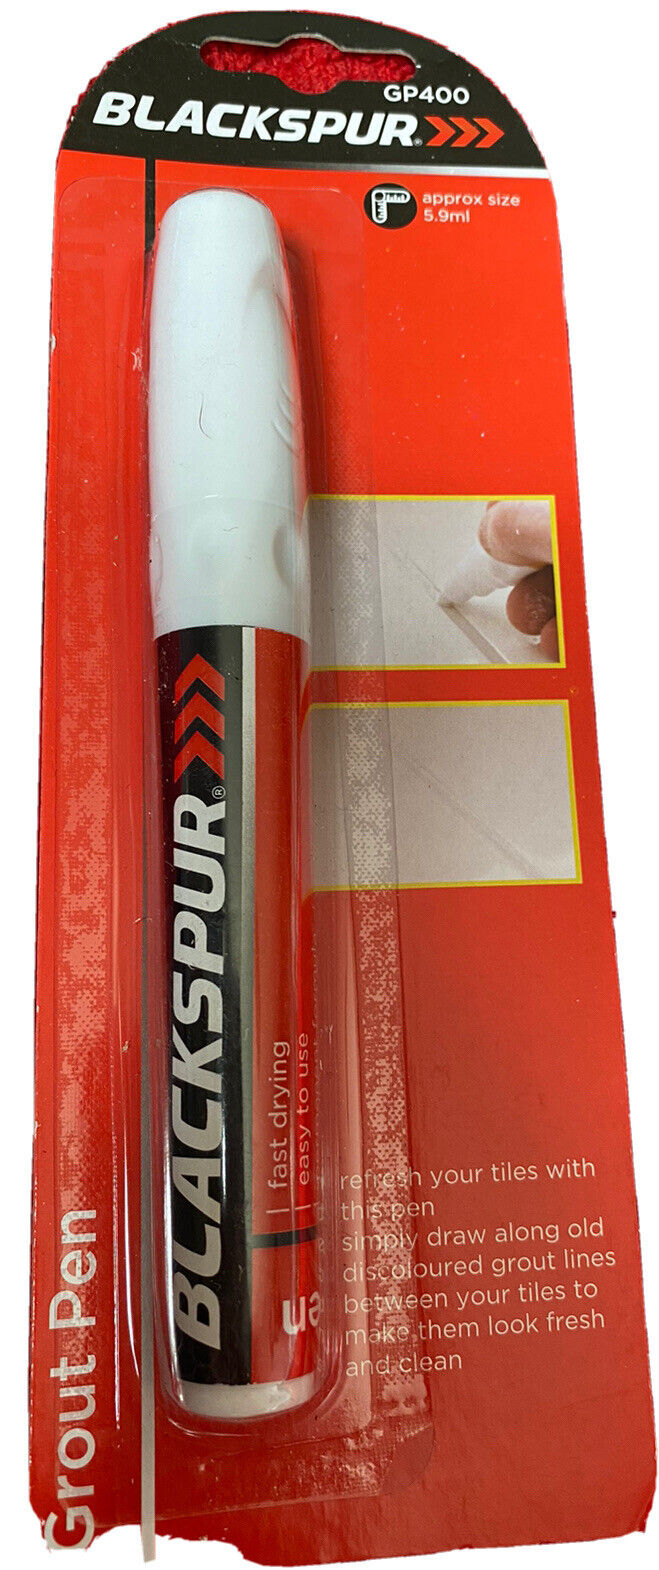 Blackspur Refresher White Grout Pen RRP £2.99 CLEARANCE XL £1.99